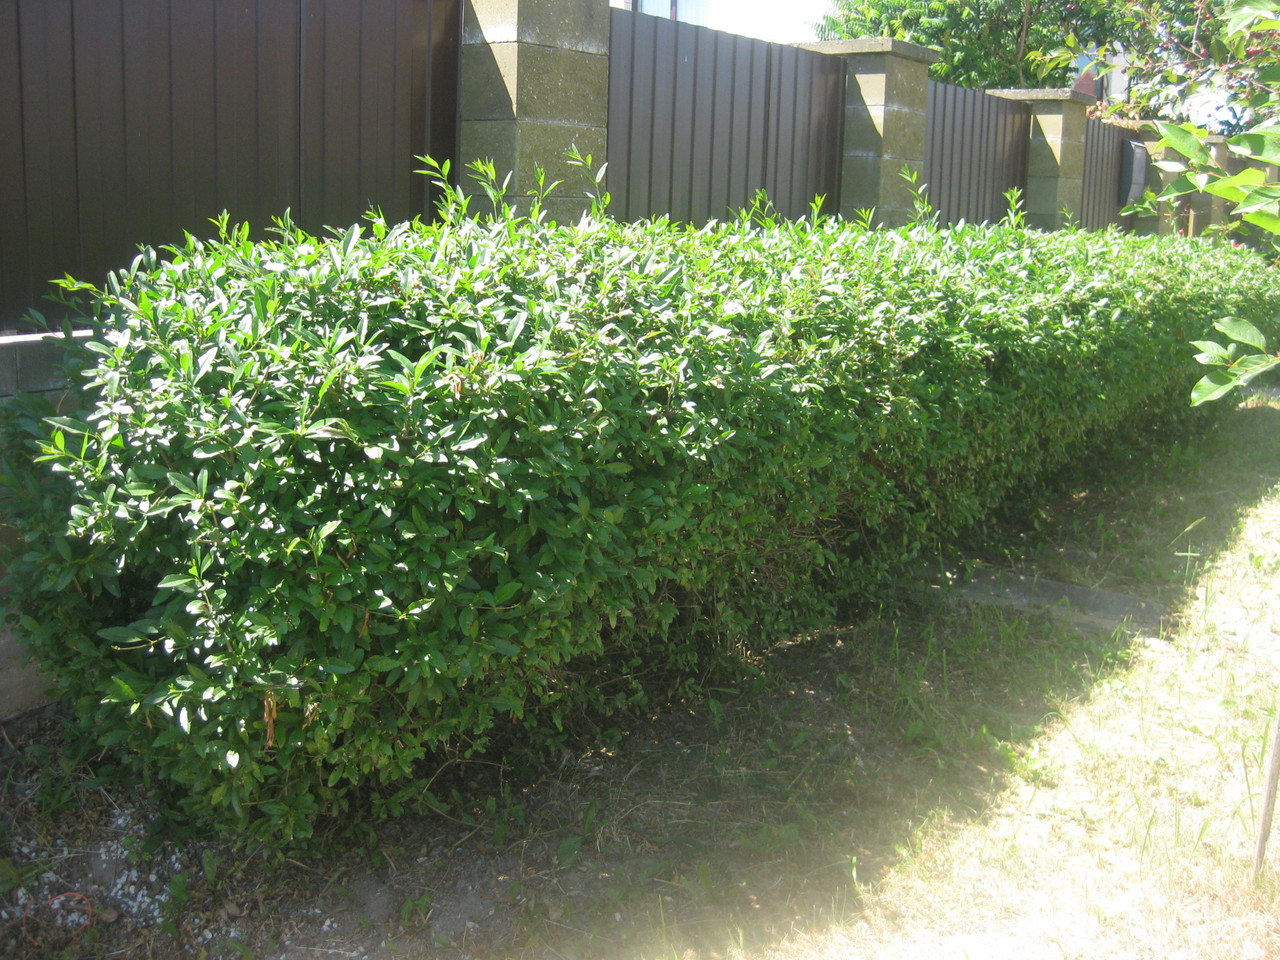 A small hedge along the fence from a profiled sheet